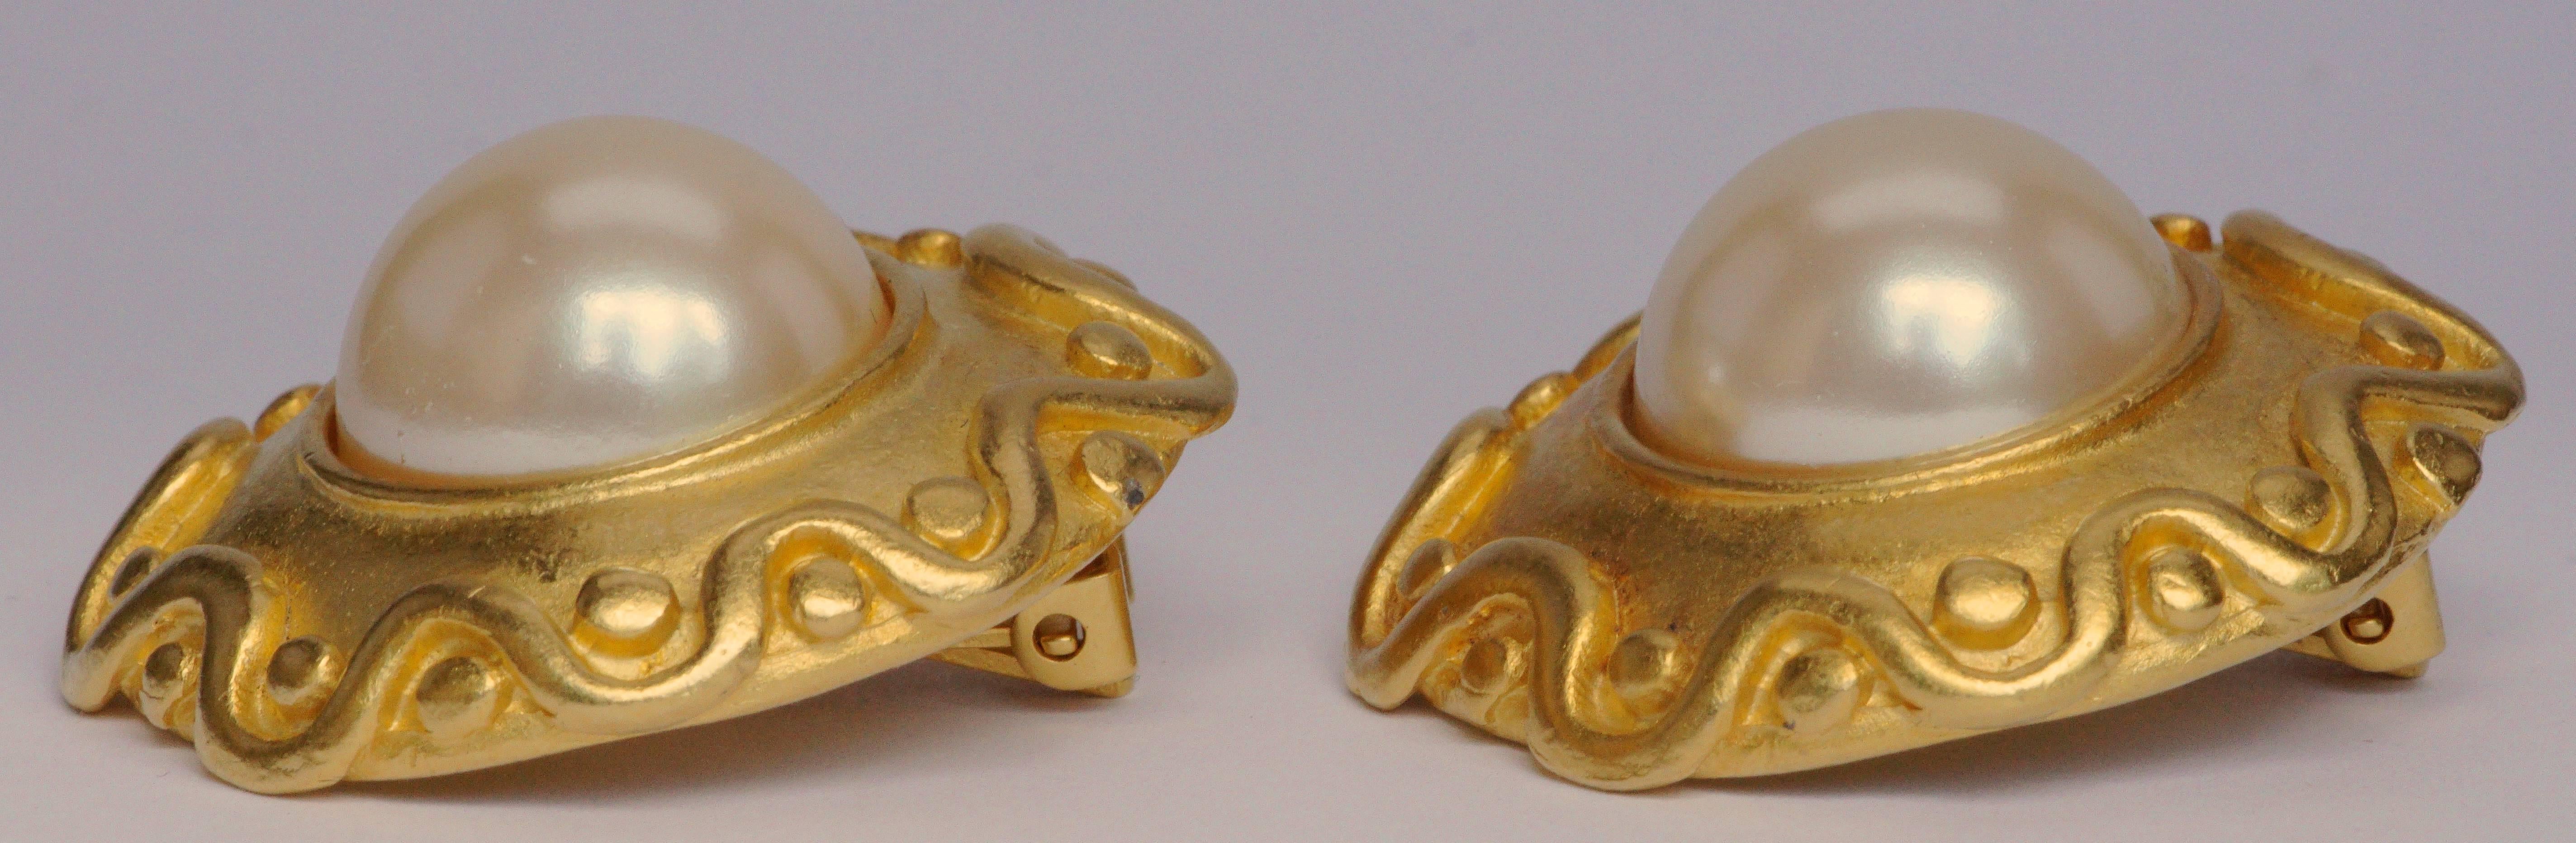 Kenneth Jay Lane round 1990s matt gold tone clip on earrings, featuring faux pearls and a wave design edge. Measuring diameter 3.2cm / 1.26 inches. The reverse is stamped Kenneth©Lane. They have a lovely golden glow.

This is a stylish pair of